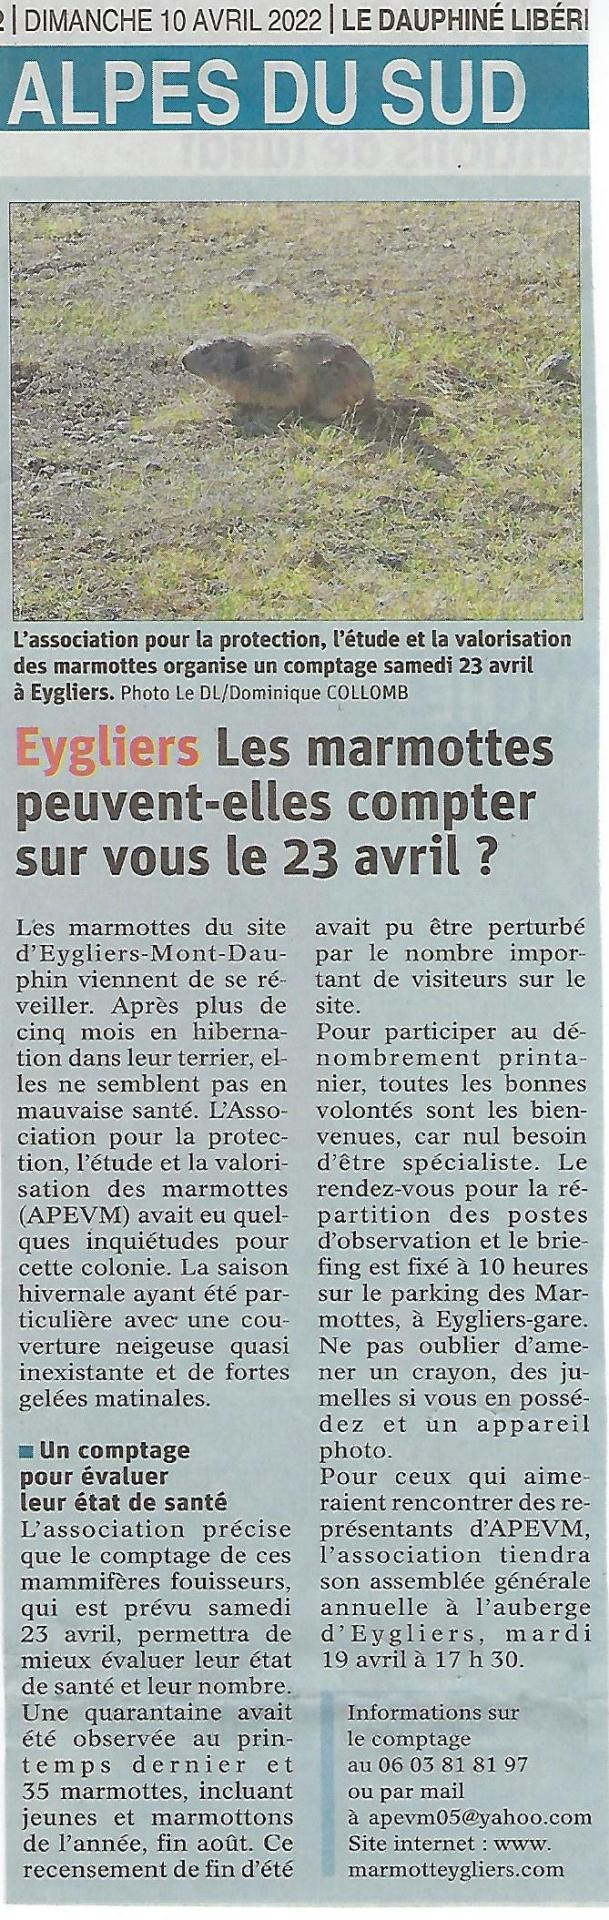 Article 10 avril 2022